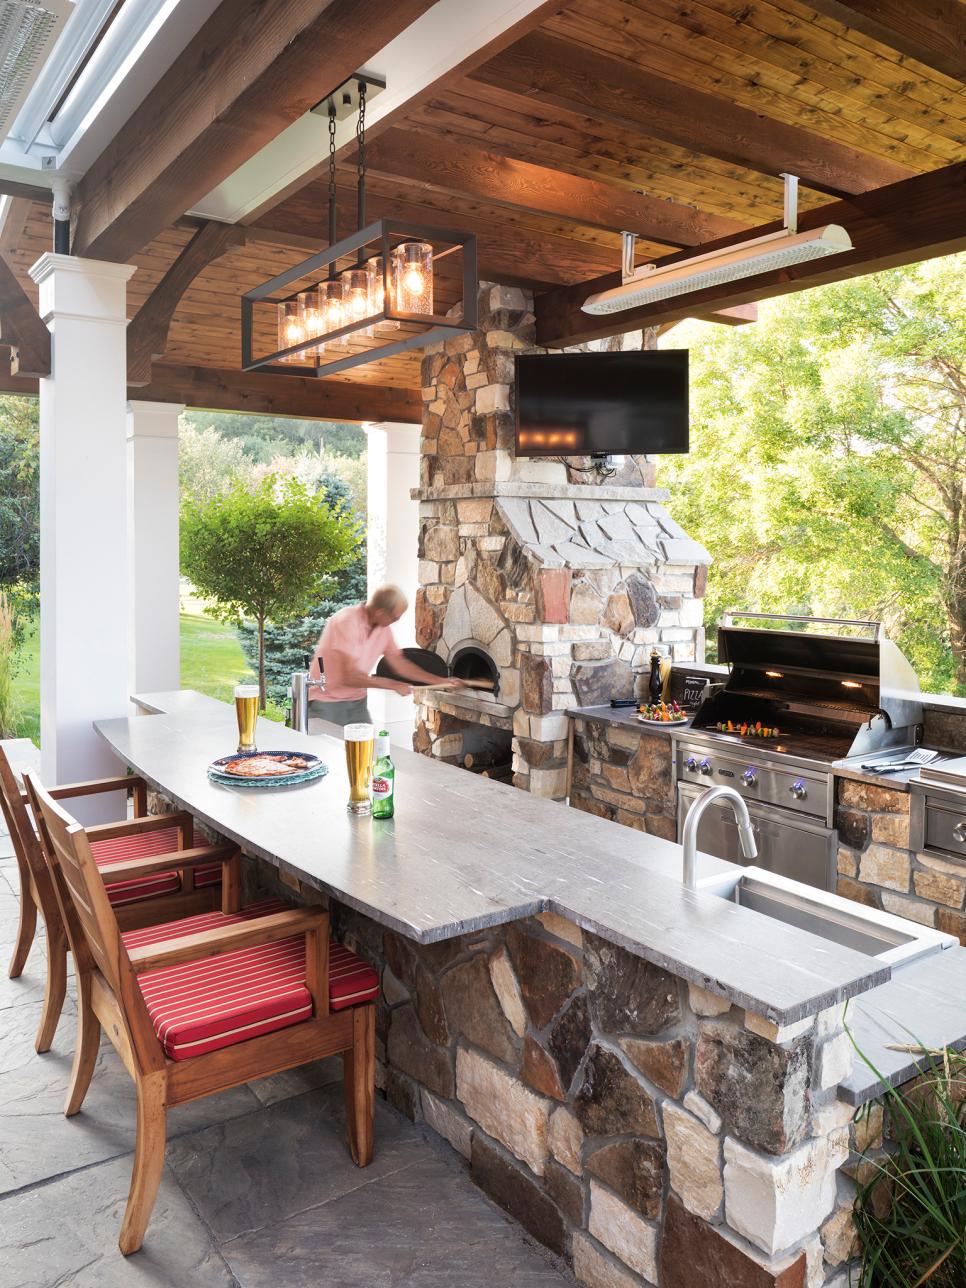 Outdoor Kitchen With Pizza Oven | HGTV